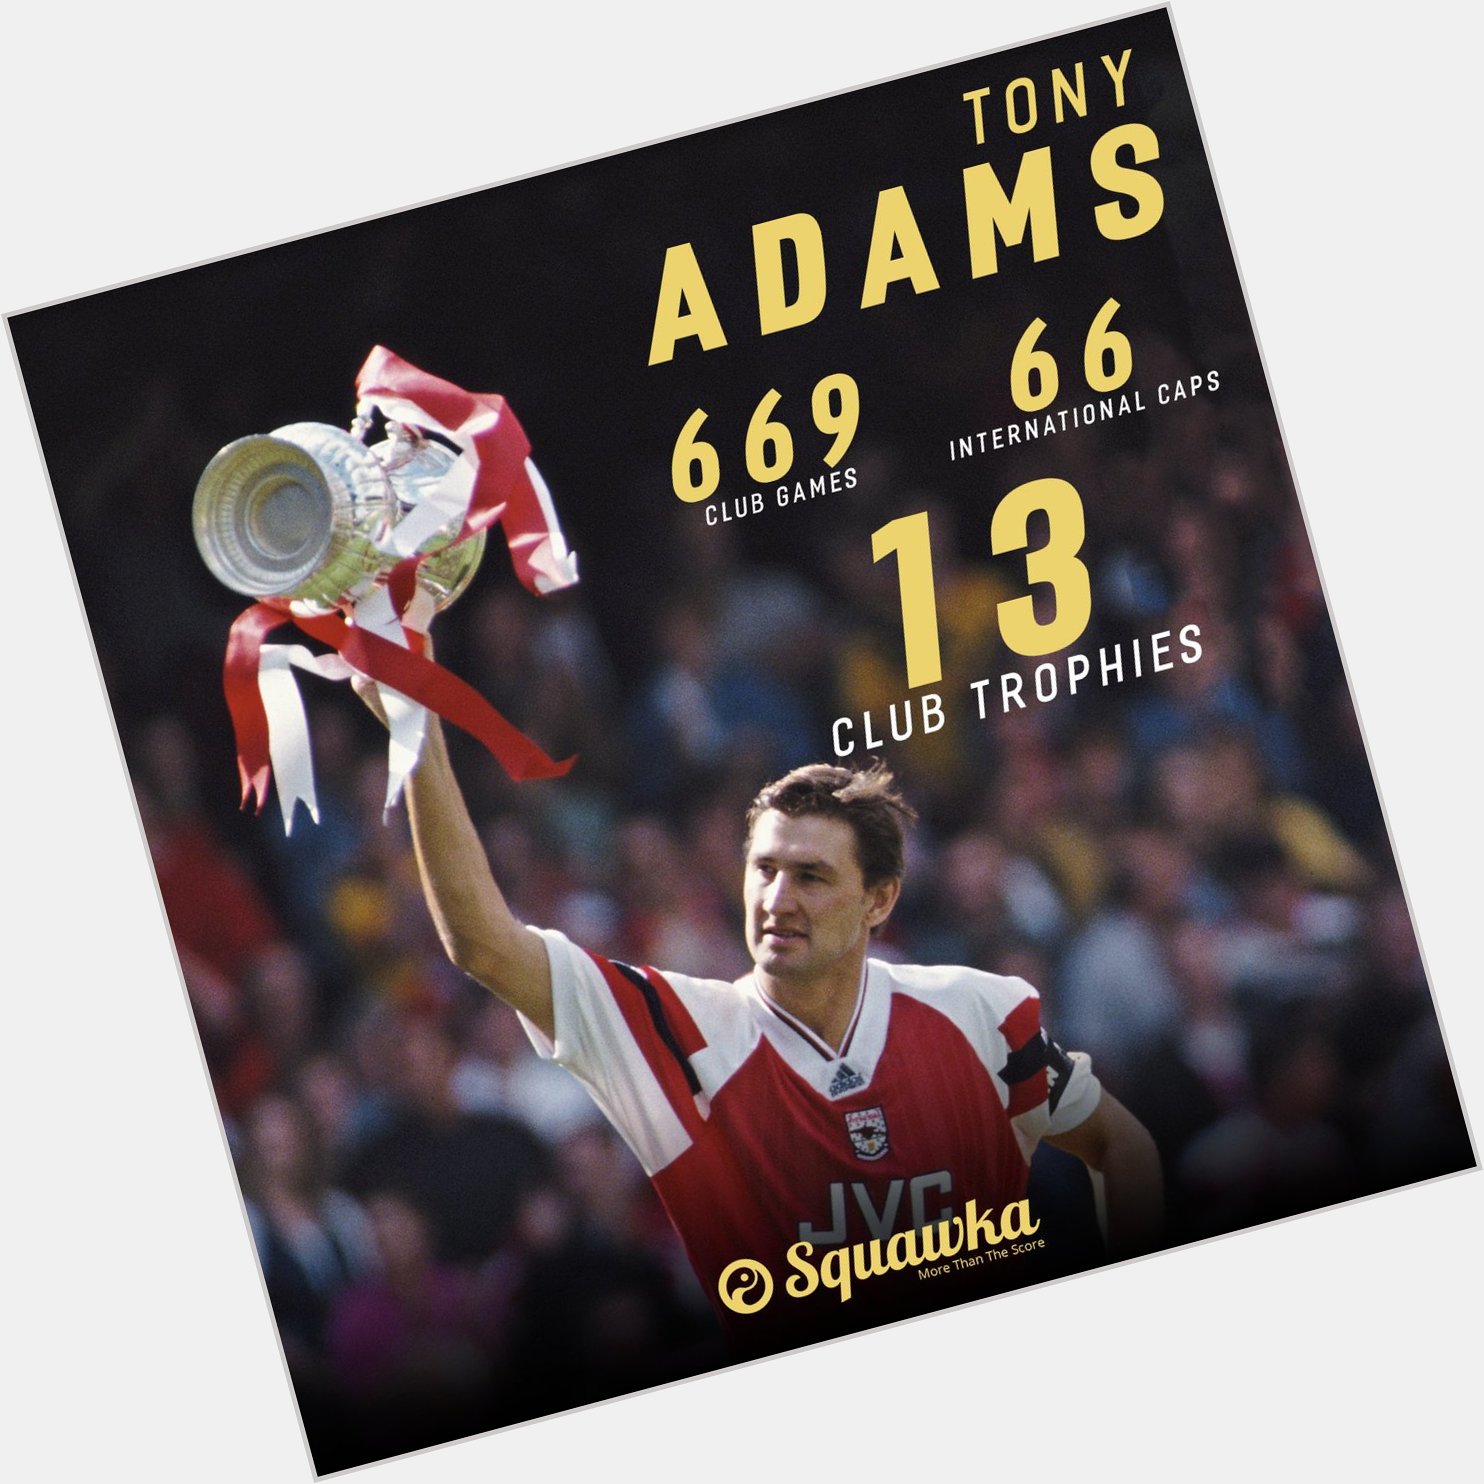 Happy 51st birthday, Tony Adams!

He was named Arsenal\s youngest ever club captain at 21-years-old.  